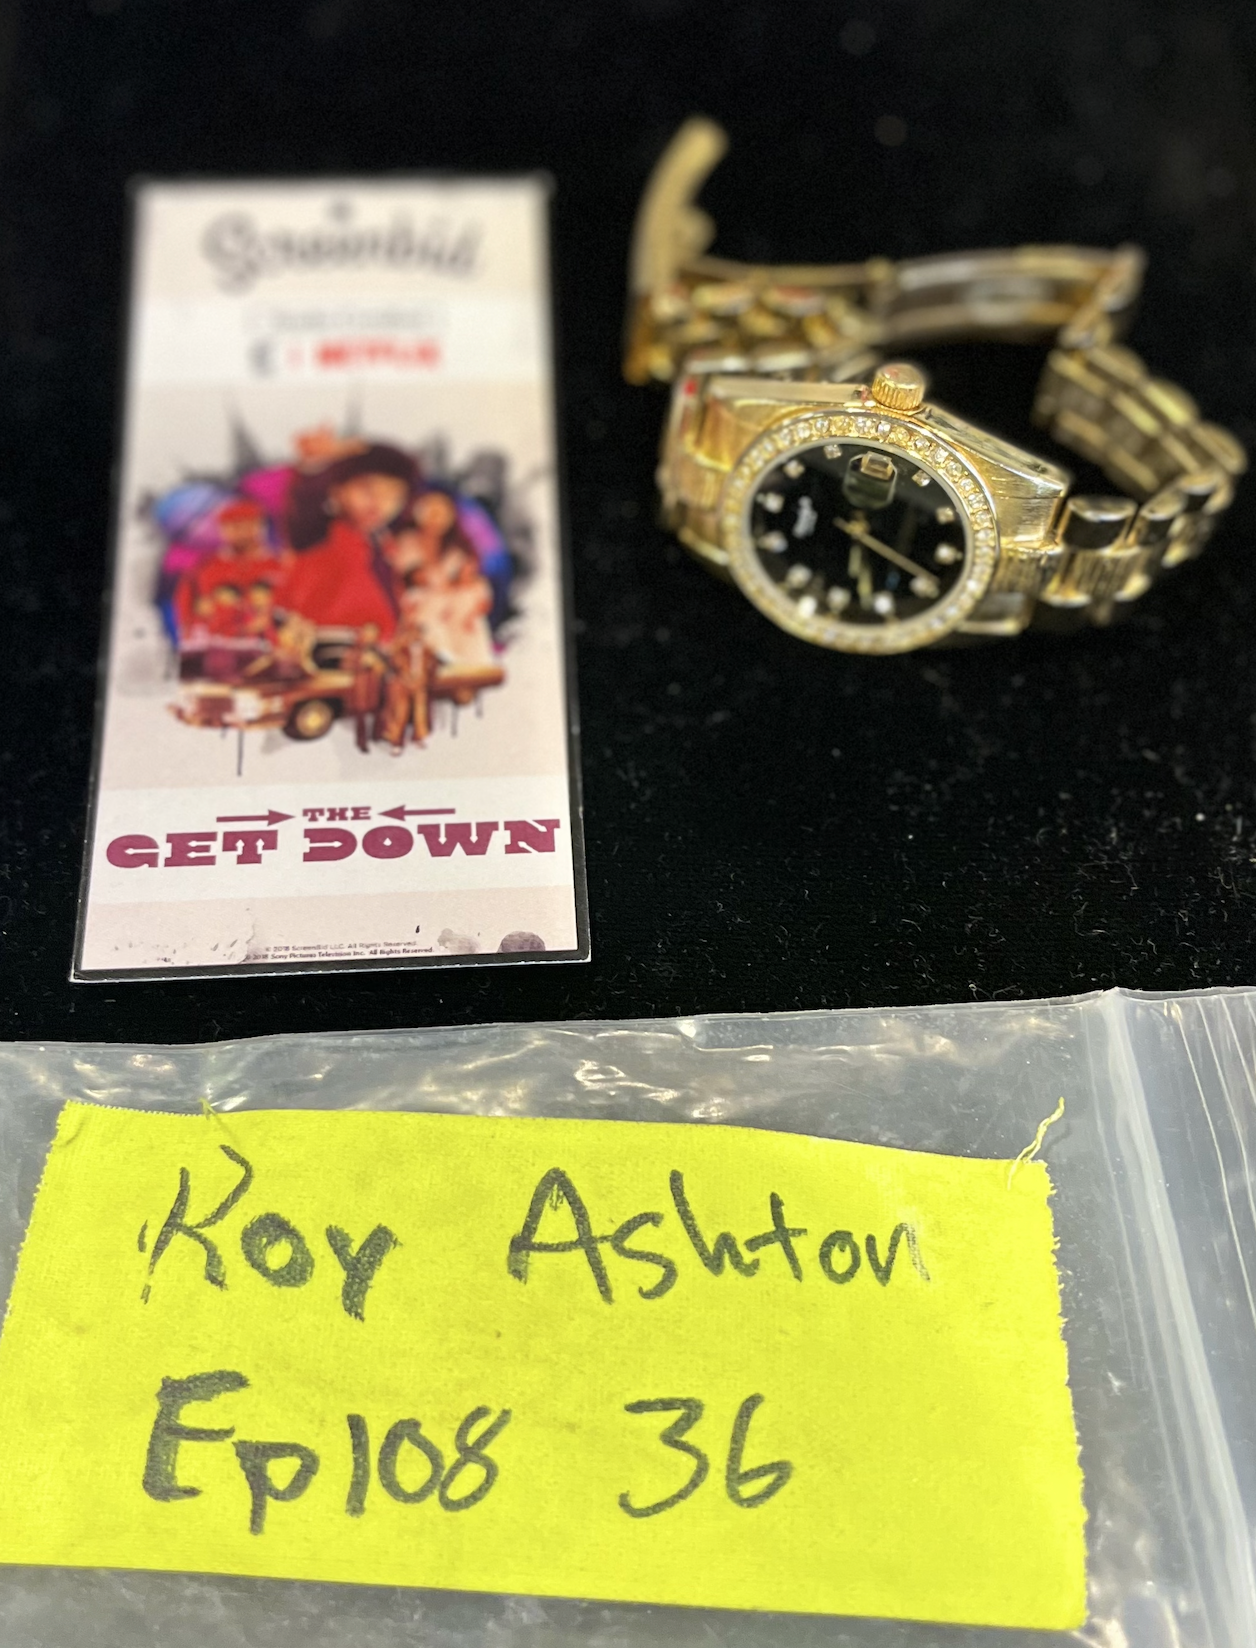 THE GET DOWN: Roy Asheton's Japanese Watch from Ep 108 Sc 36